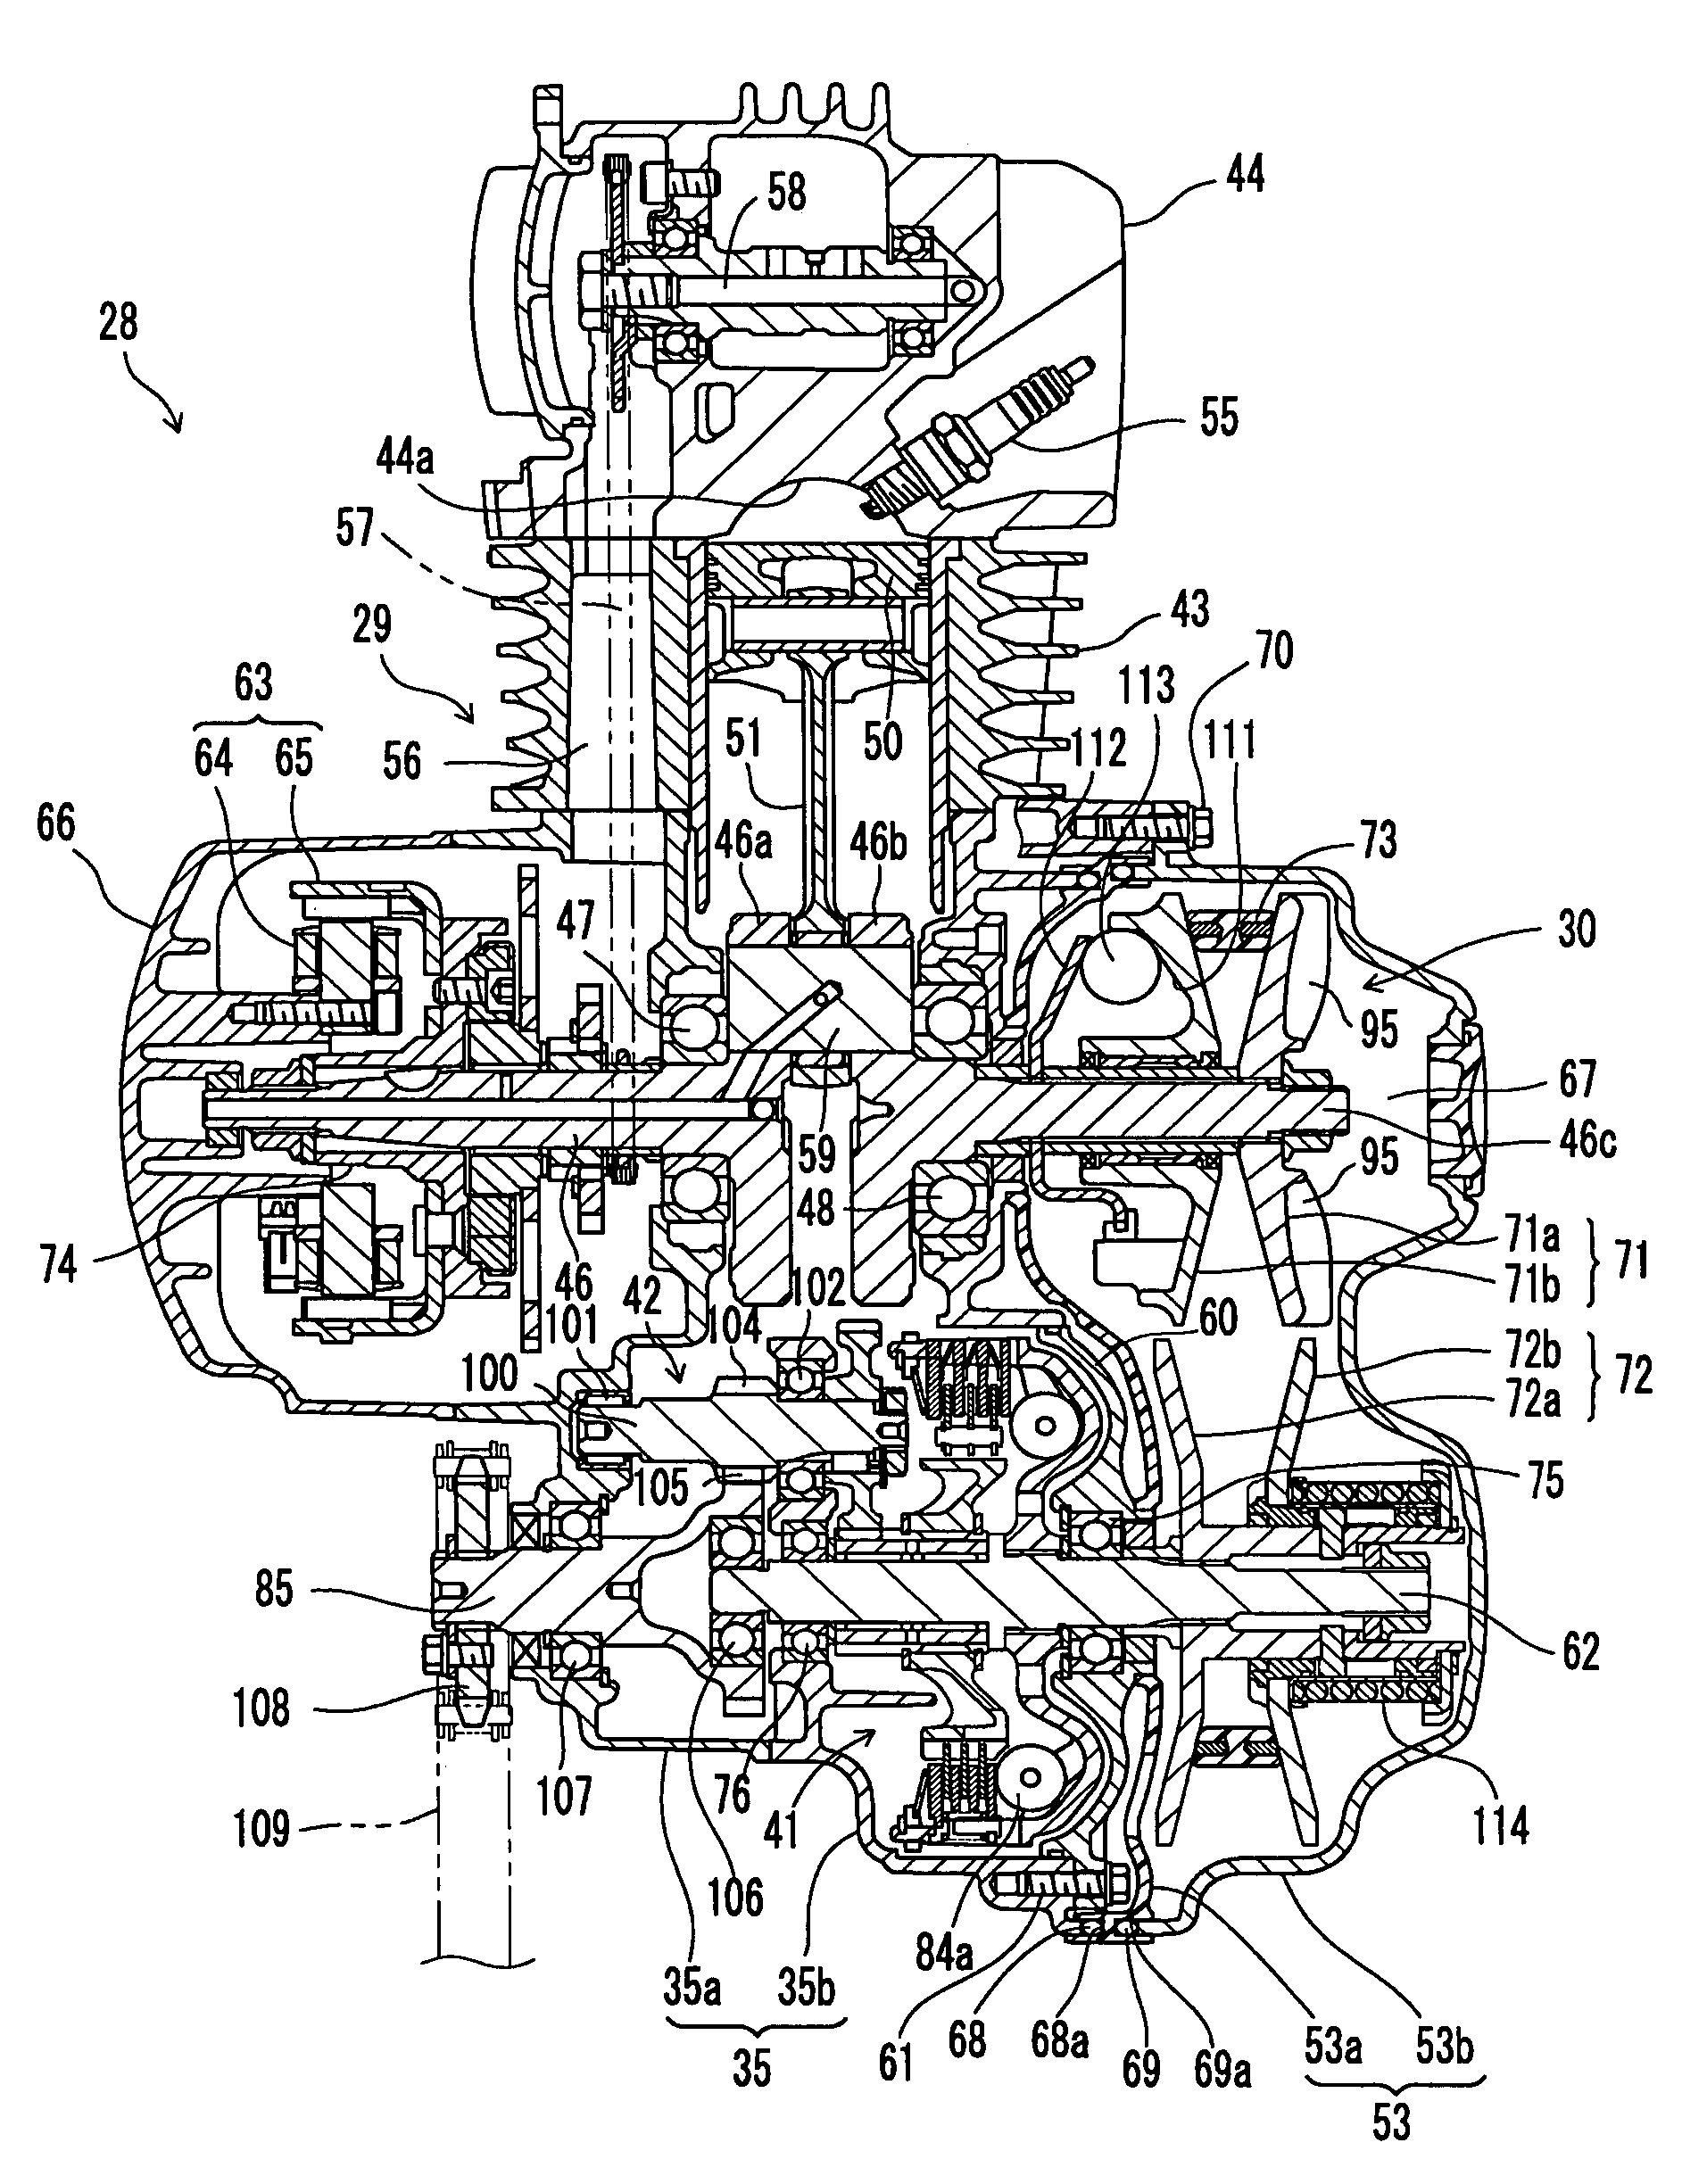 Belt-type continuously variable transmission and straddle-type vehicle